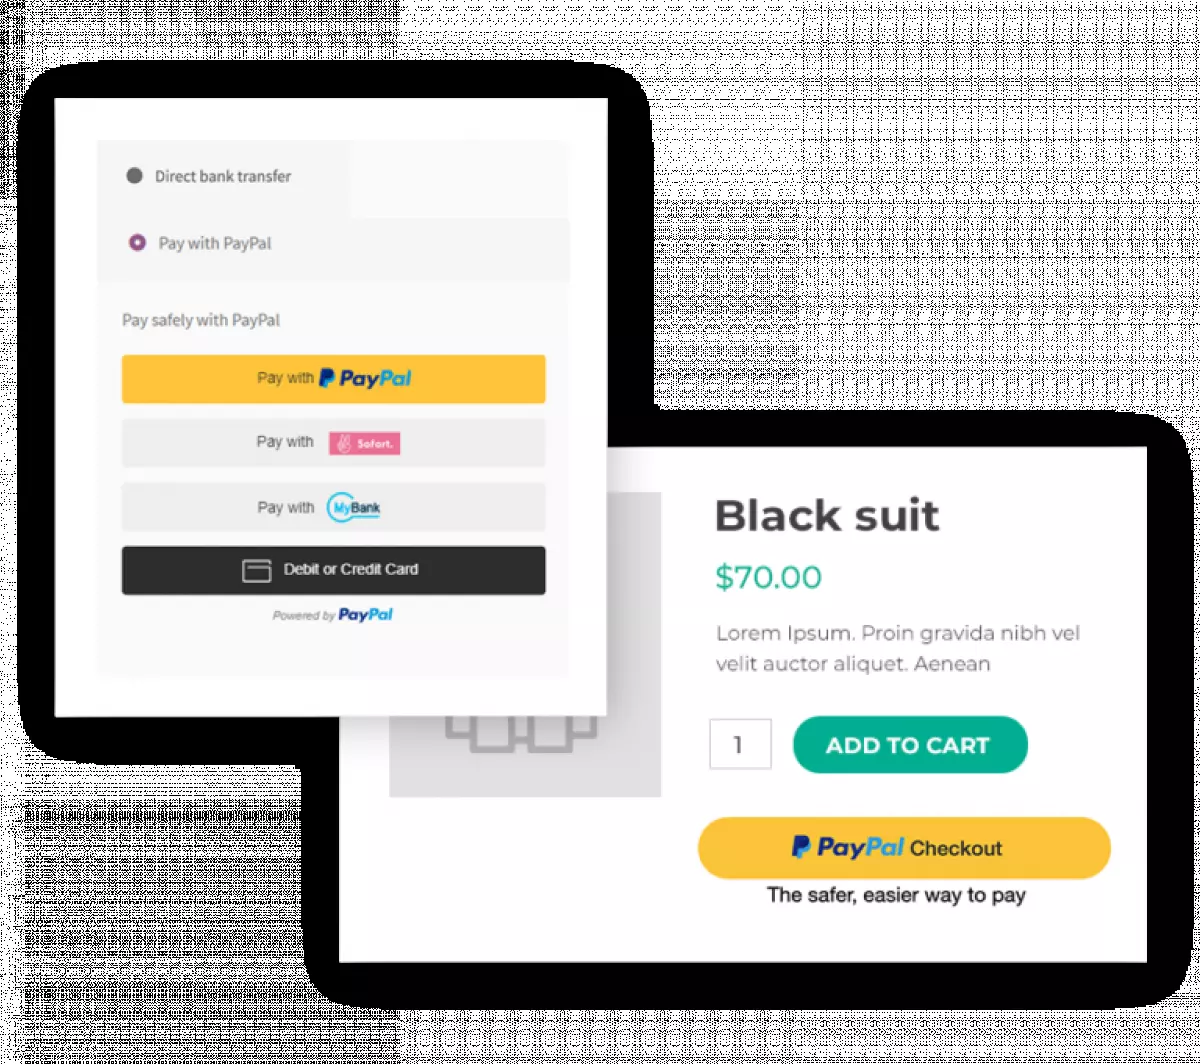  YITH PayPal Payments for WooCommerce 